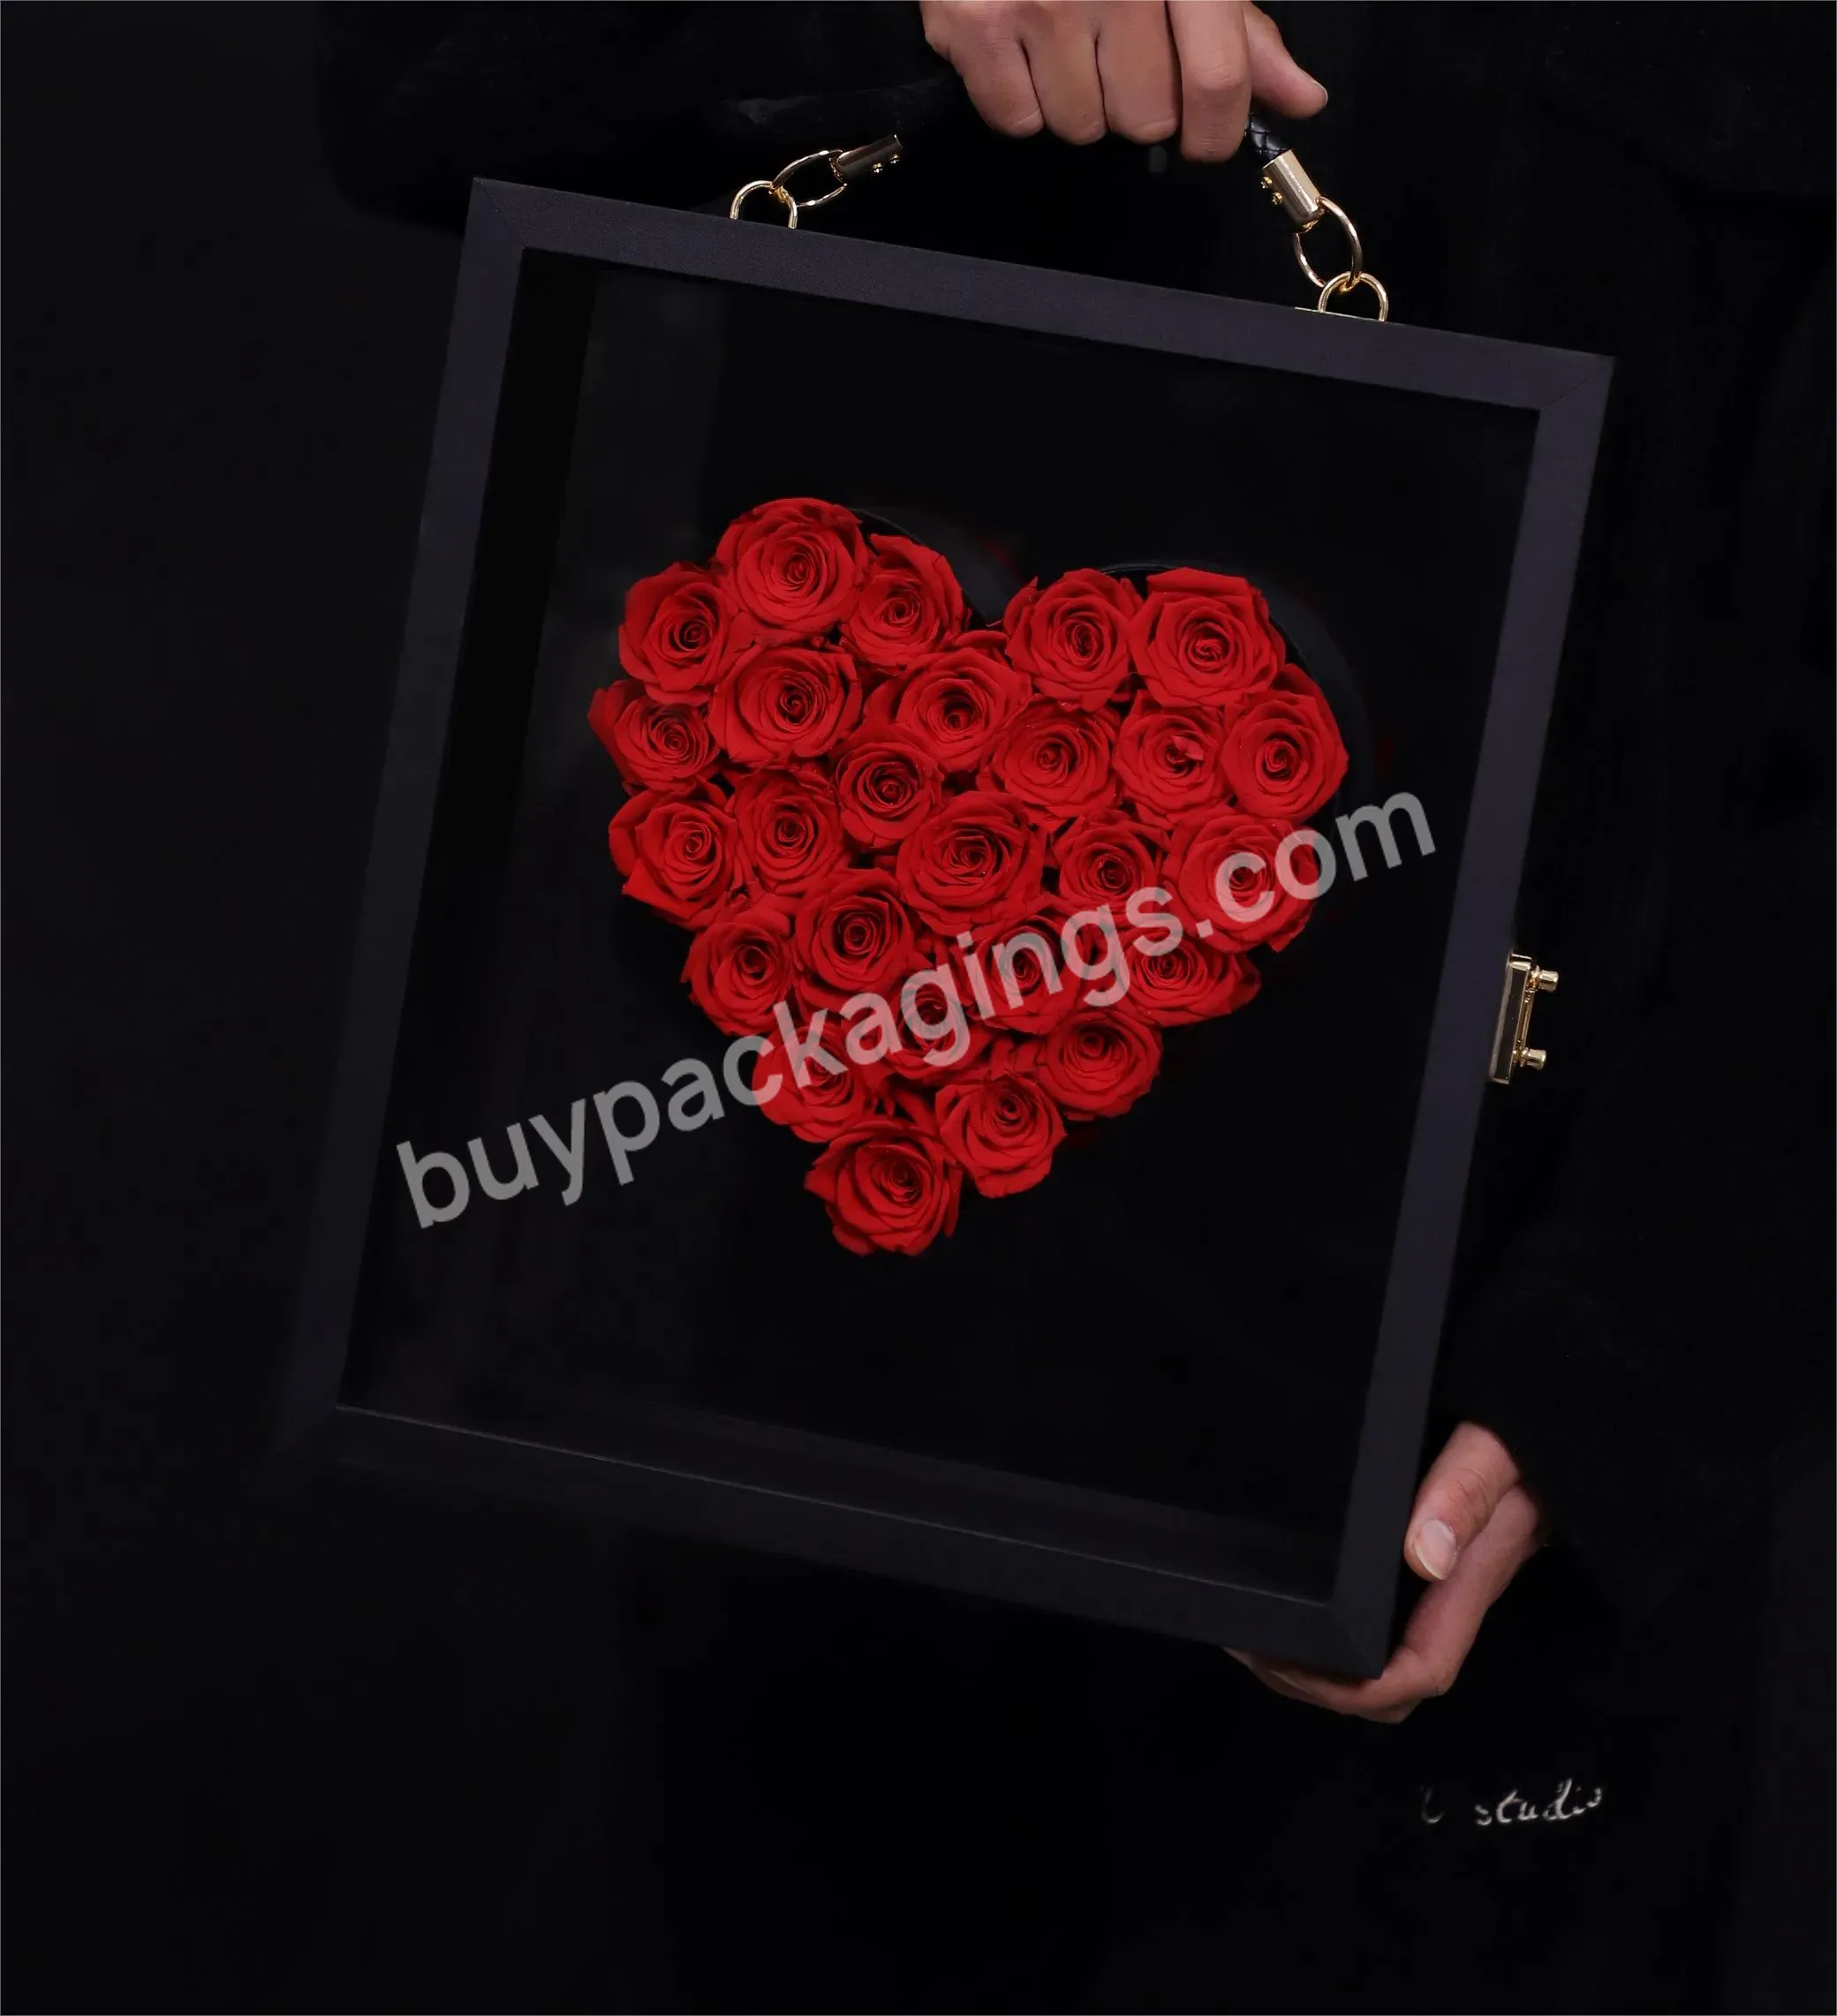 Wholesale Elegant Leather Square Flower Box Floral Box With Heart Inner For Saint Valentine's Day Wedding - Buy Wholesale Elegant Leather Square Flower Box,Floral Box With Heart Inner,Floral Box For Saint Valentine's Day Wedding.